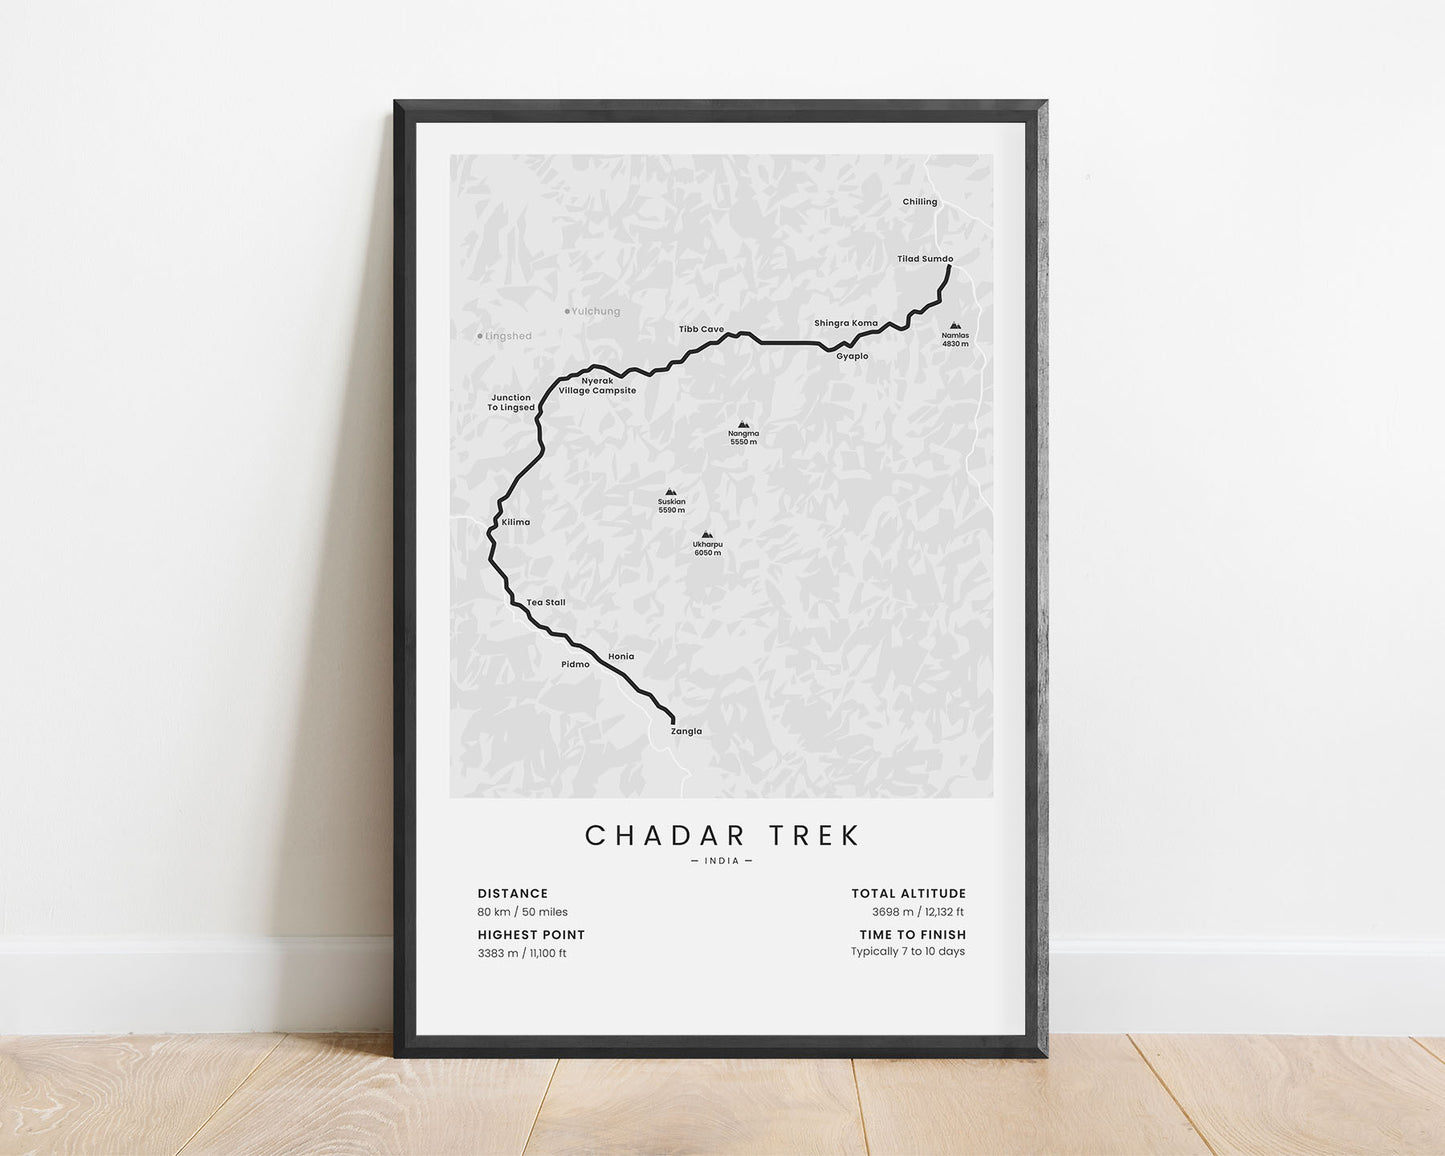 Chadar Trek (Himalayas) trail wall map with white background